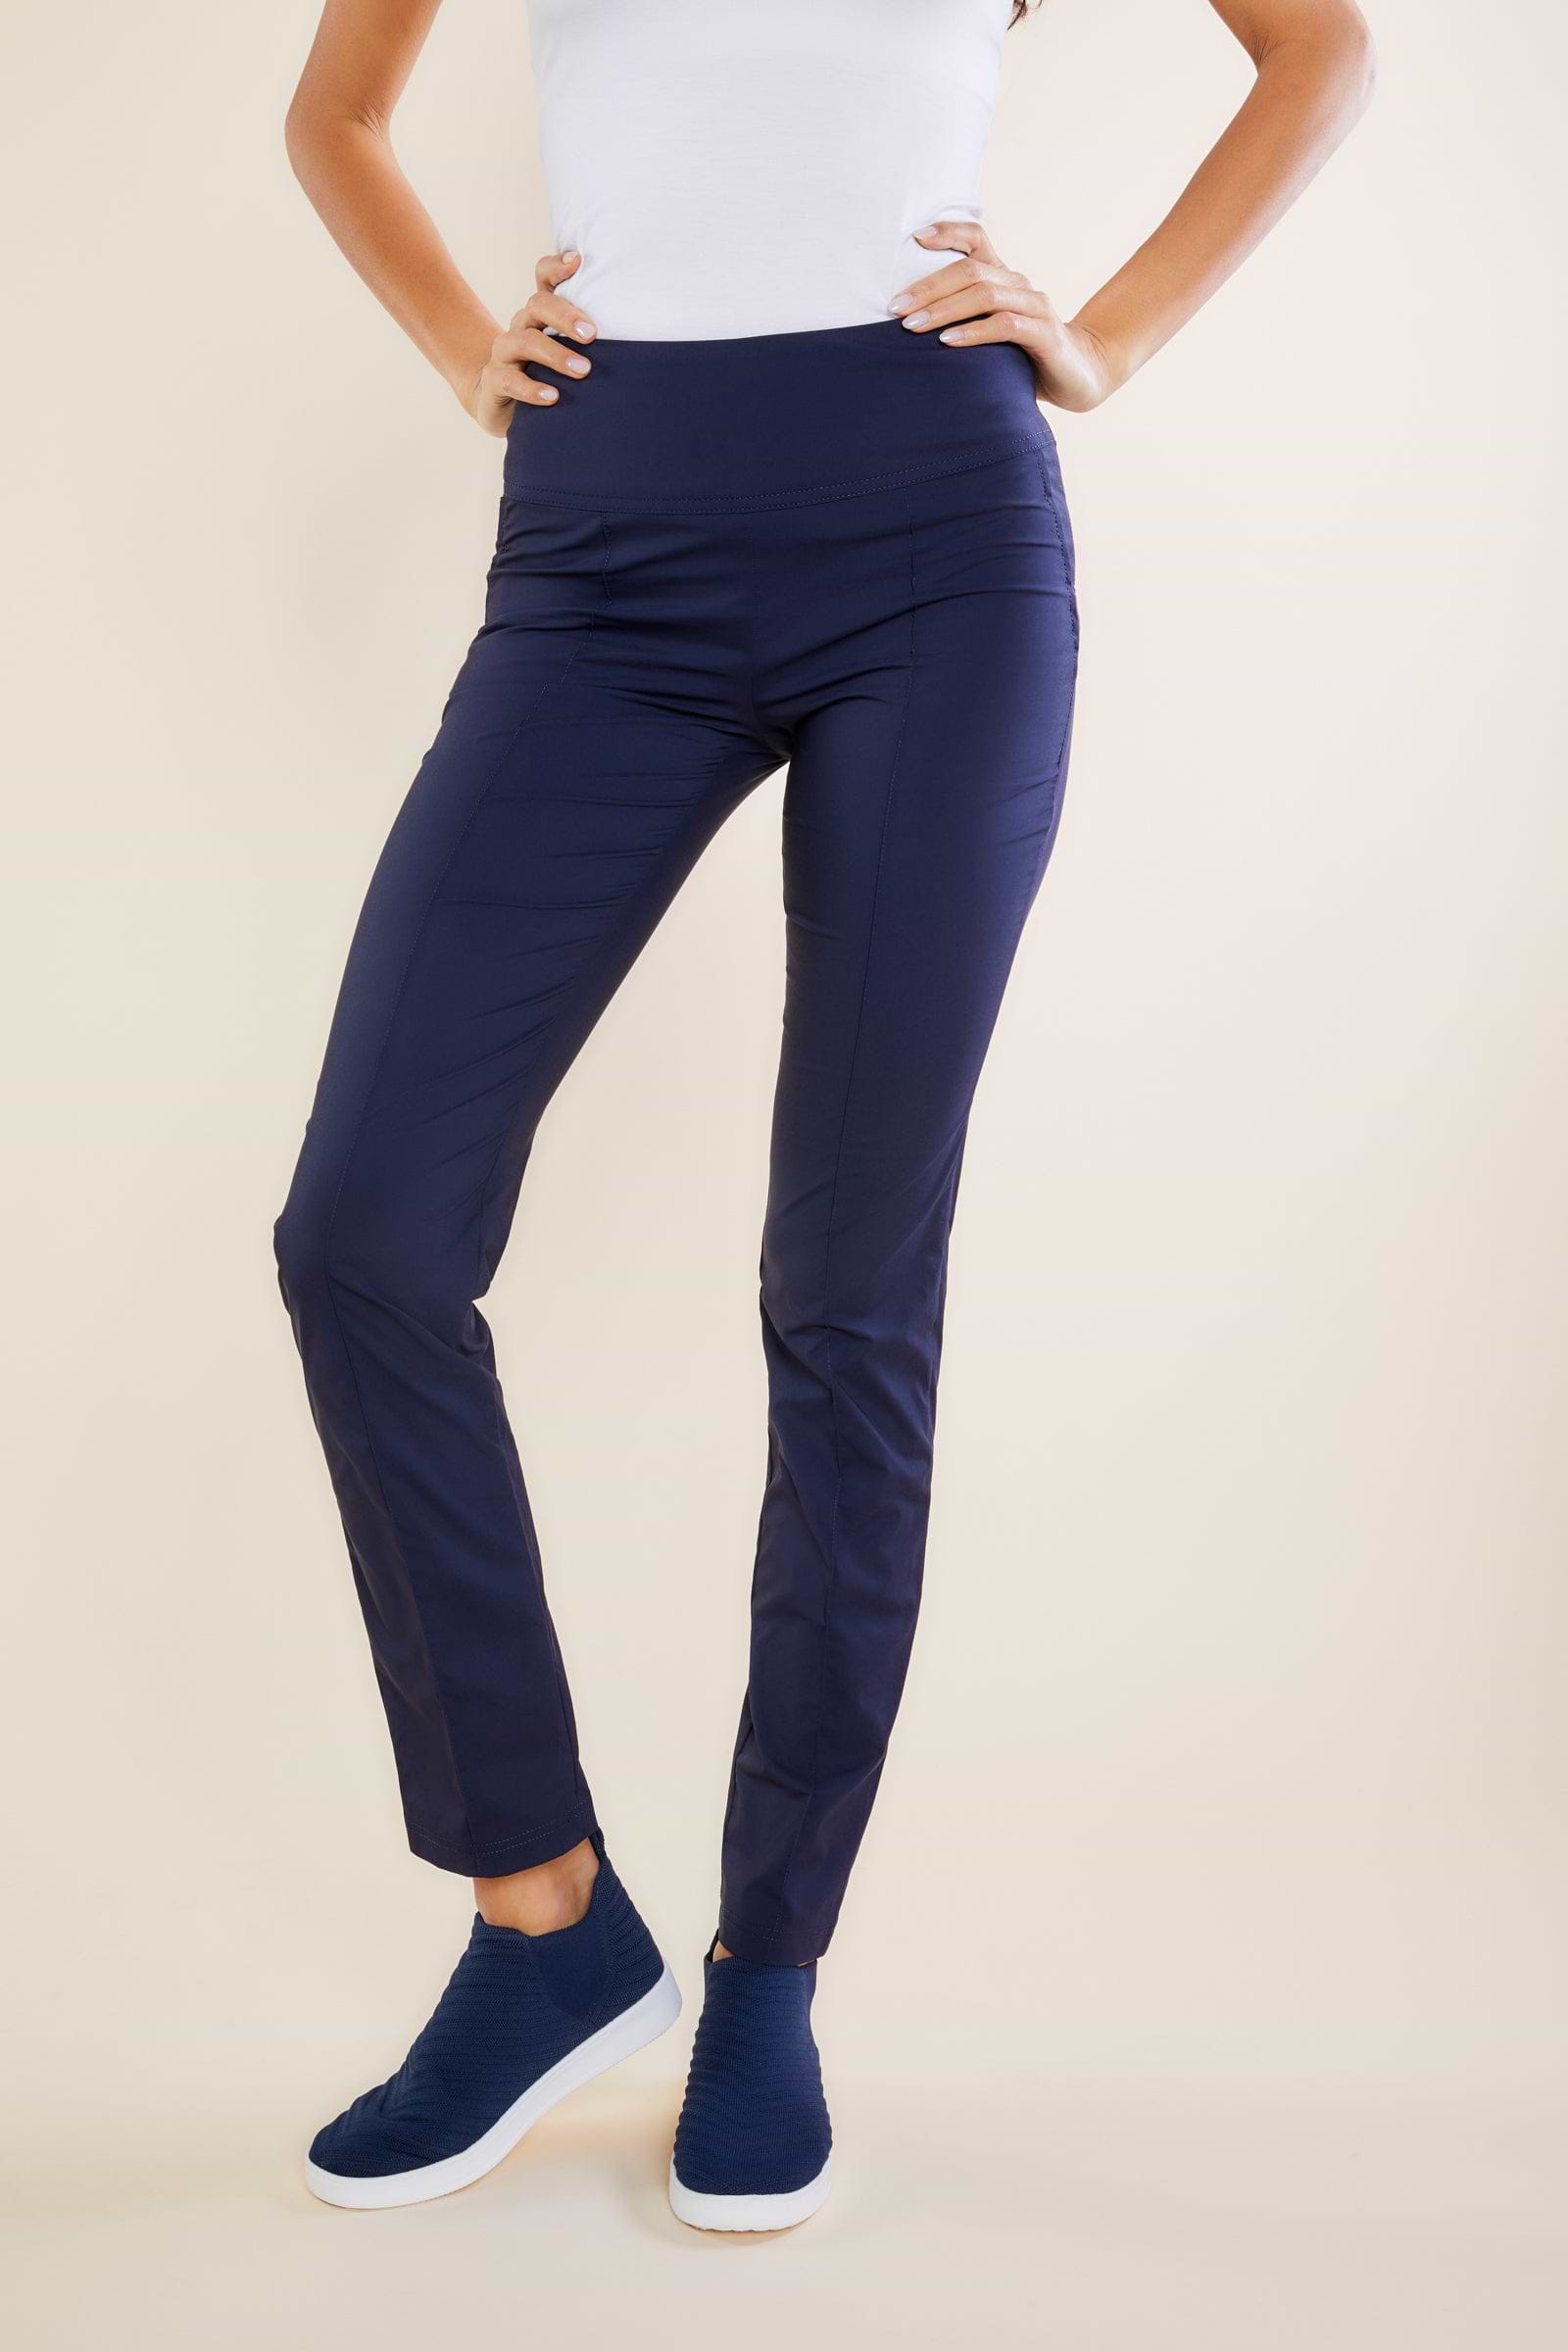 The Best Travel Pants. Front Profile of the Sonia Curvy High Rise Pant in Navy